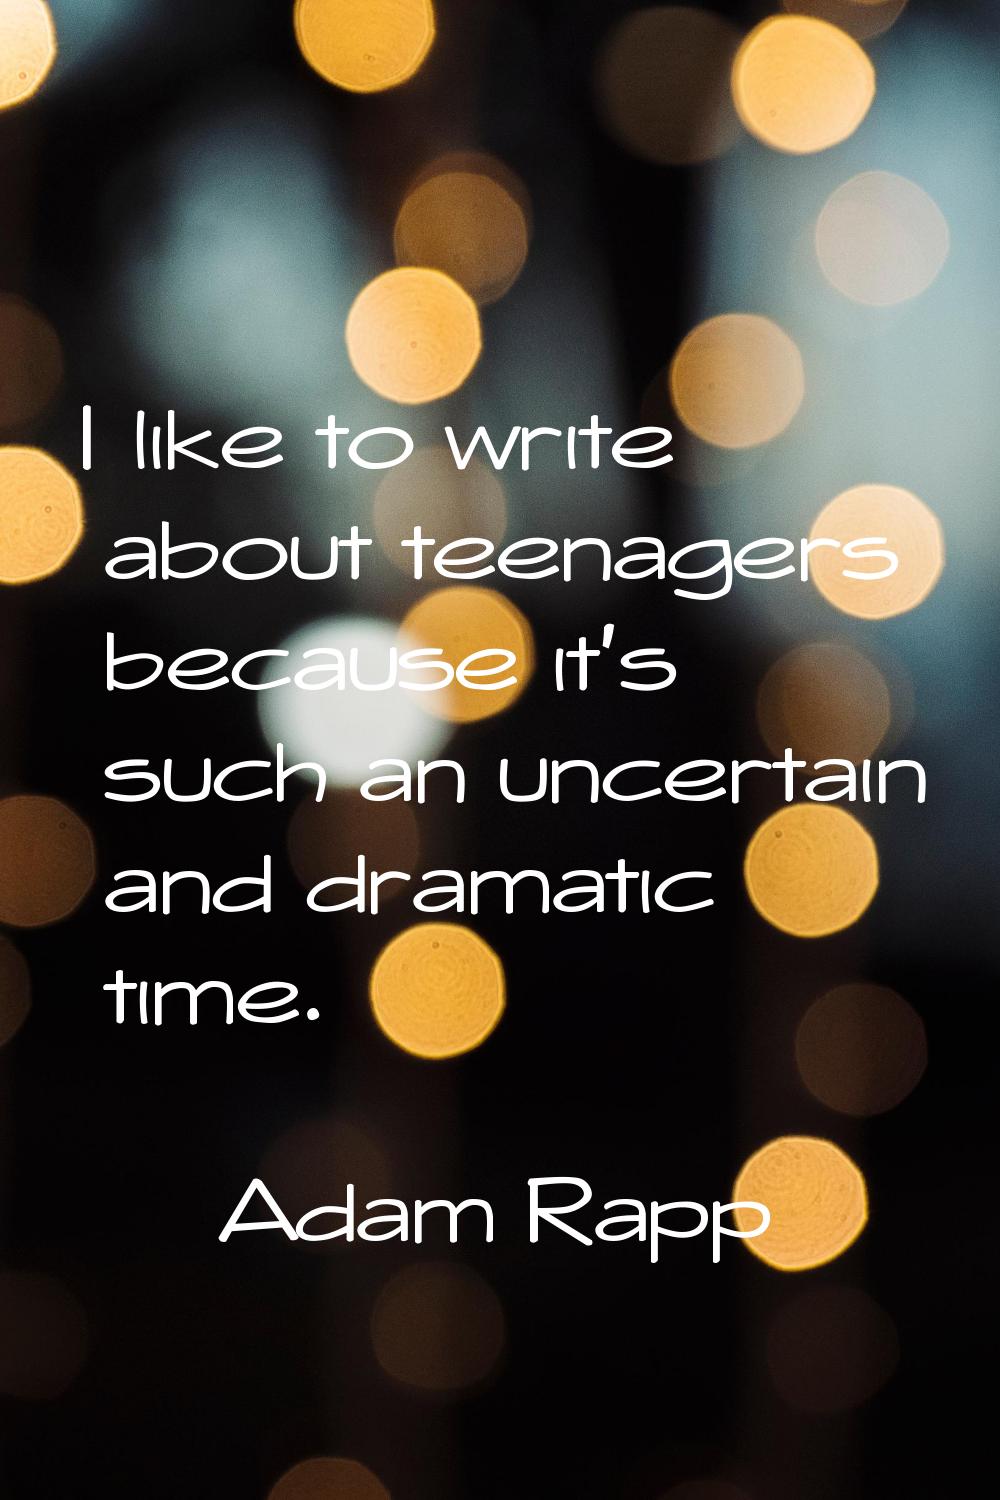 I like to write about teenagers because it's such an uncertain and dramatic time.